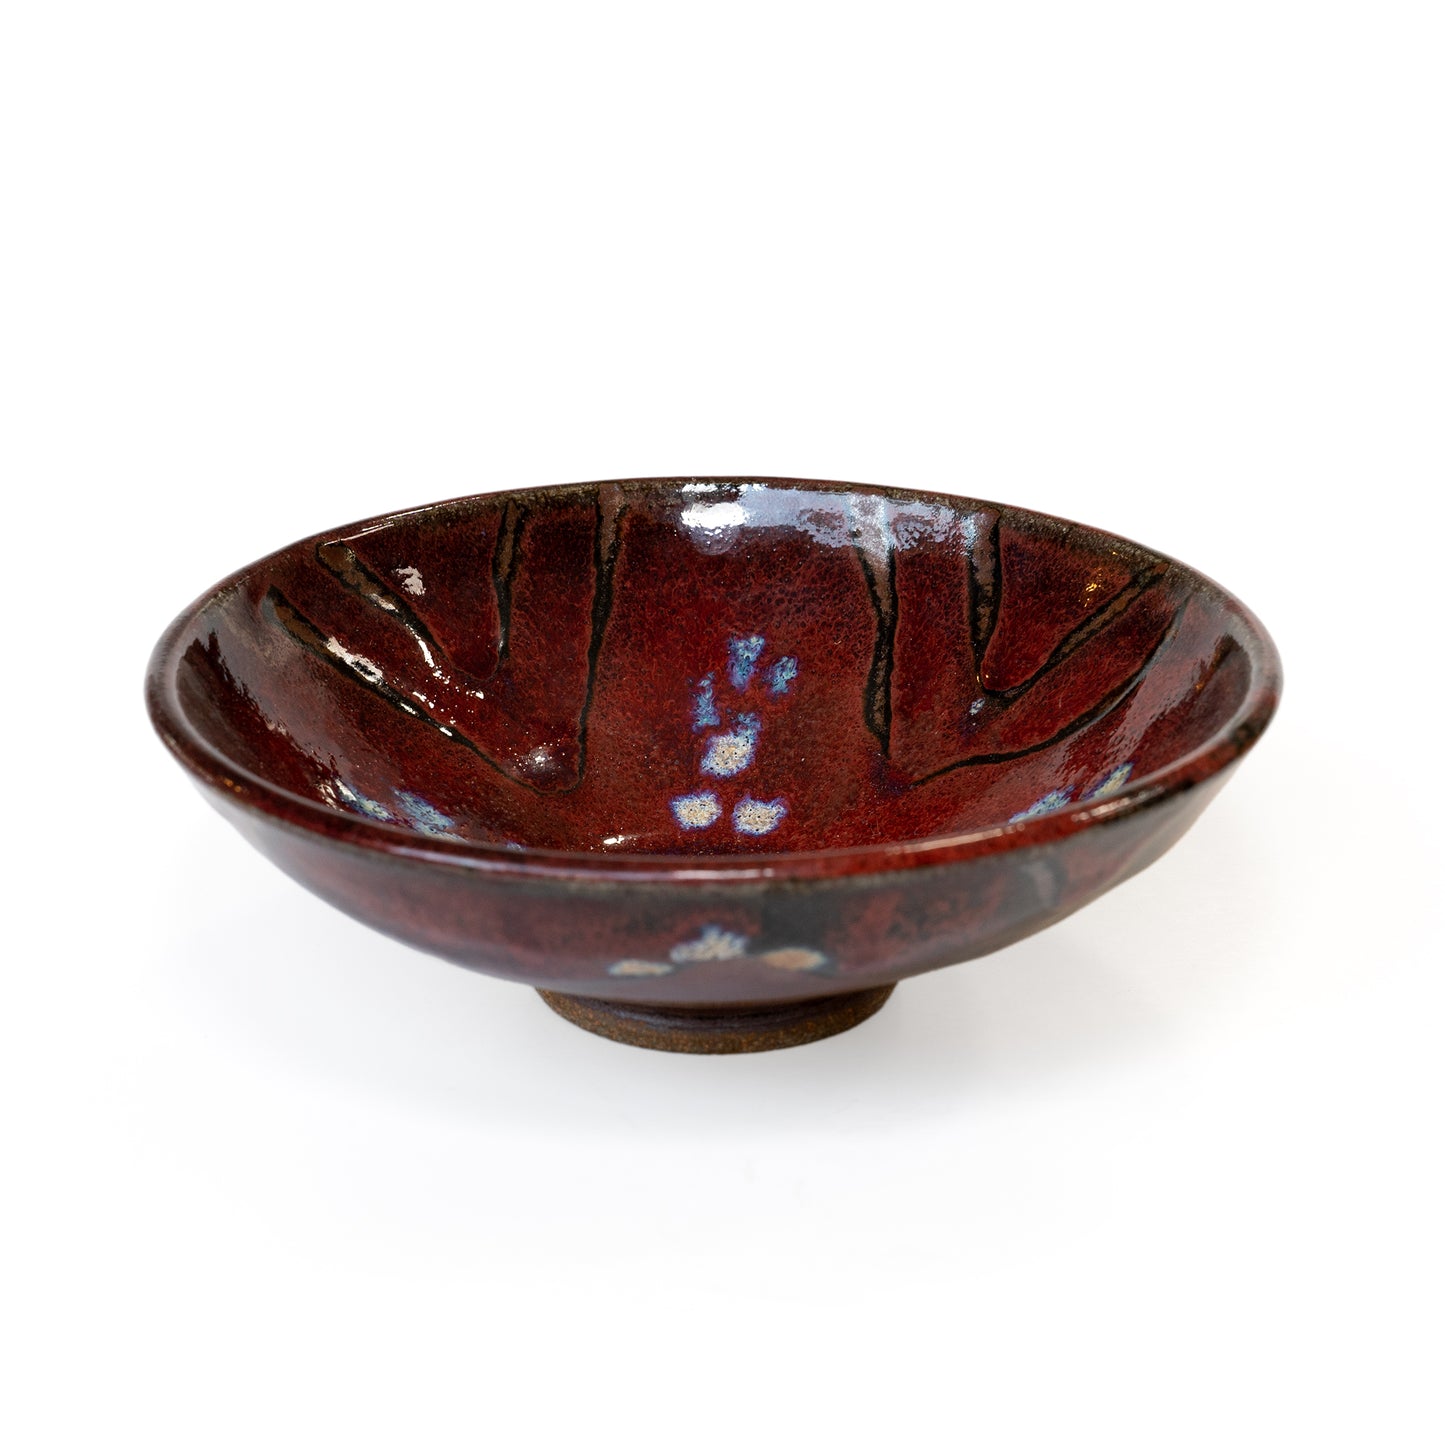 Shallow Cranberry Bowl with Multi-Colored Glaze